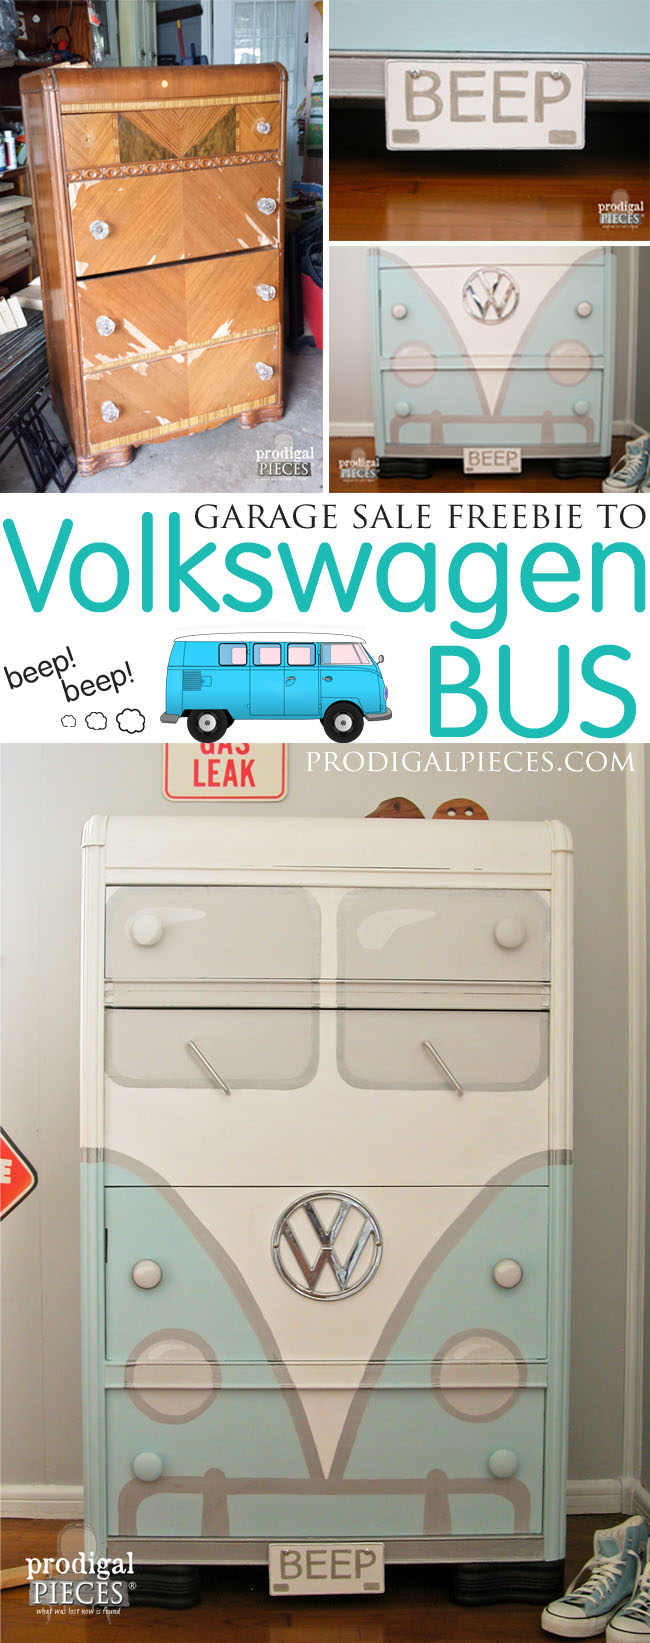 Vintage Waterfall Dresser Gets Volkswagen Bus Makeover by Prodigal Pieces | www.prodigalpieces.com